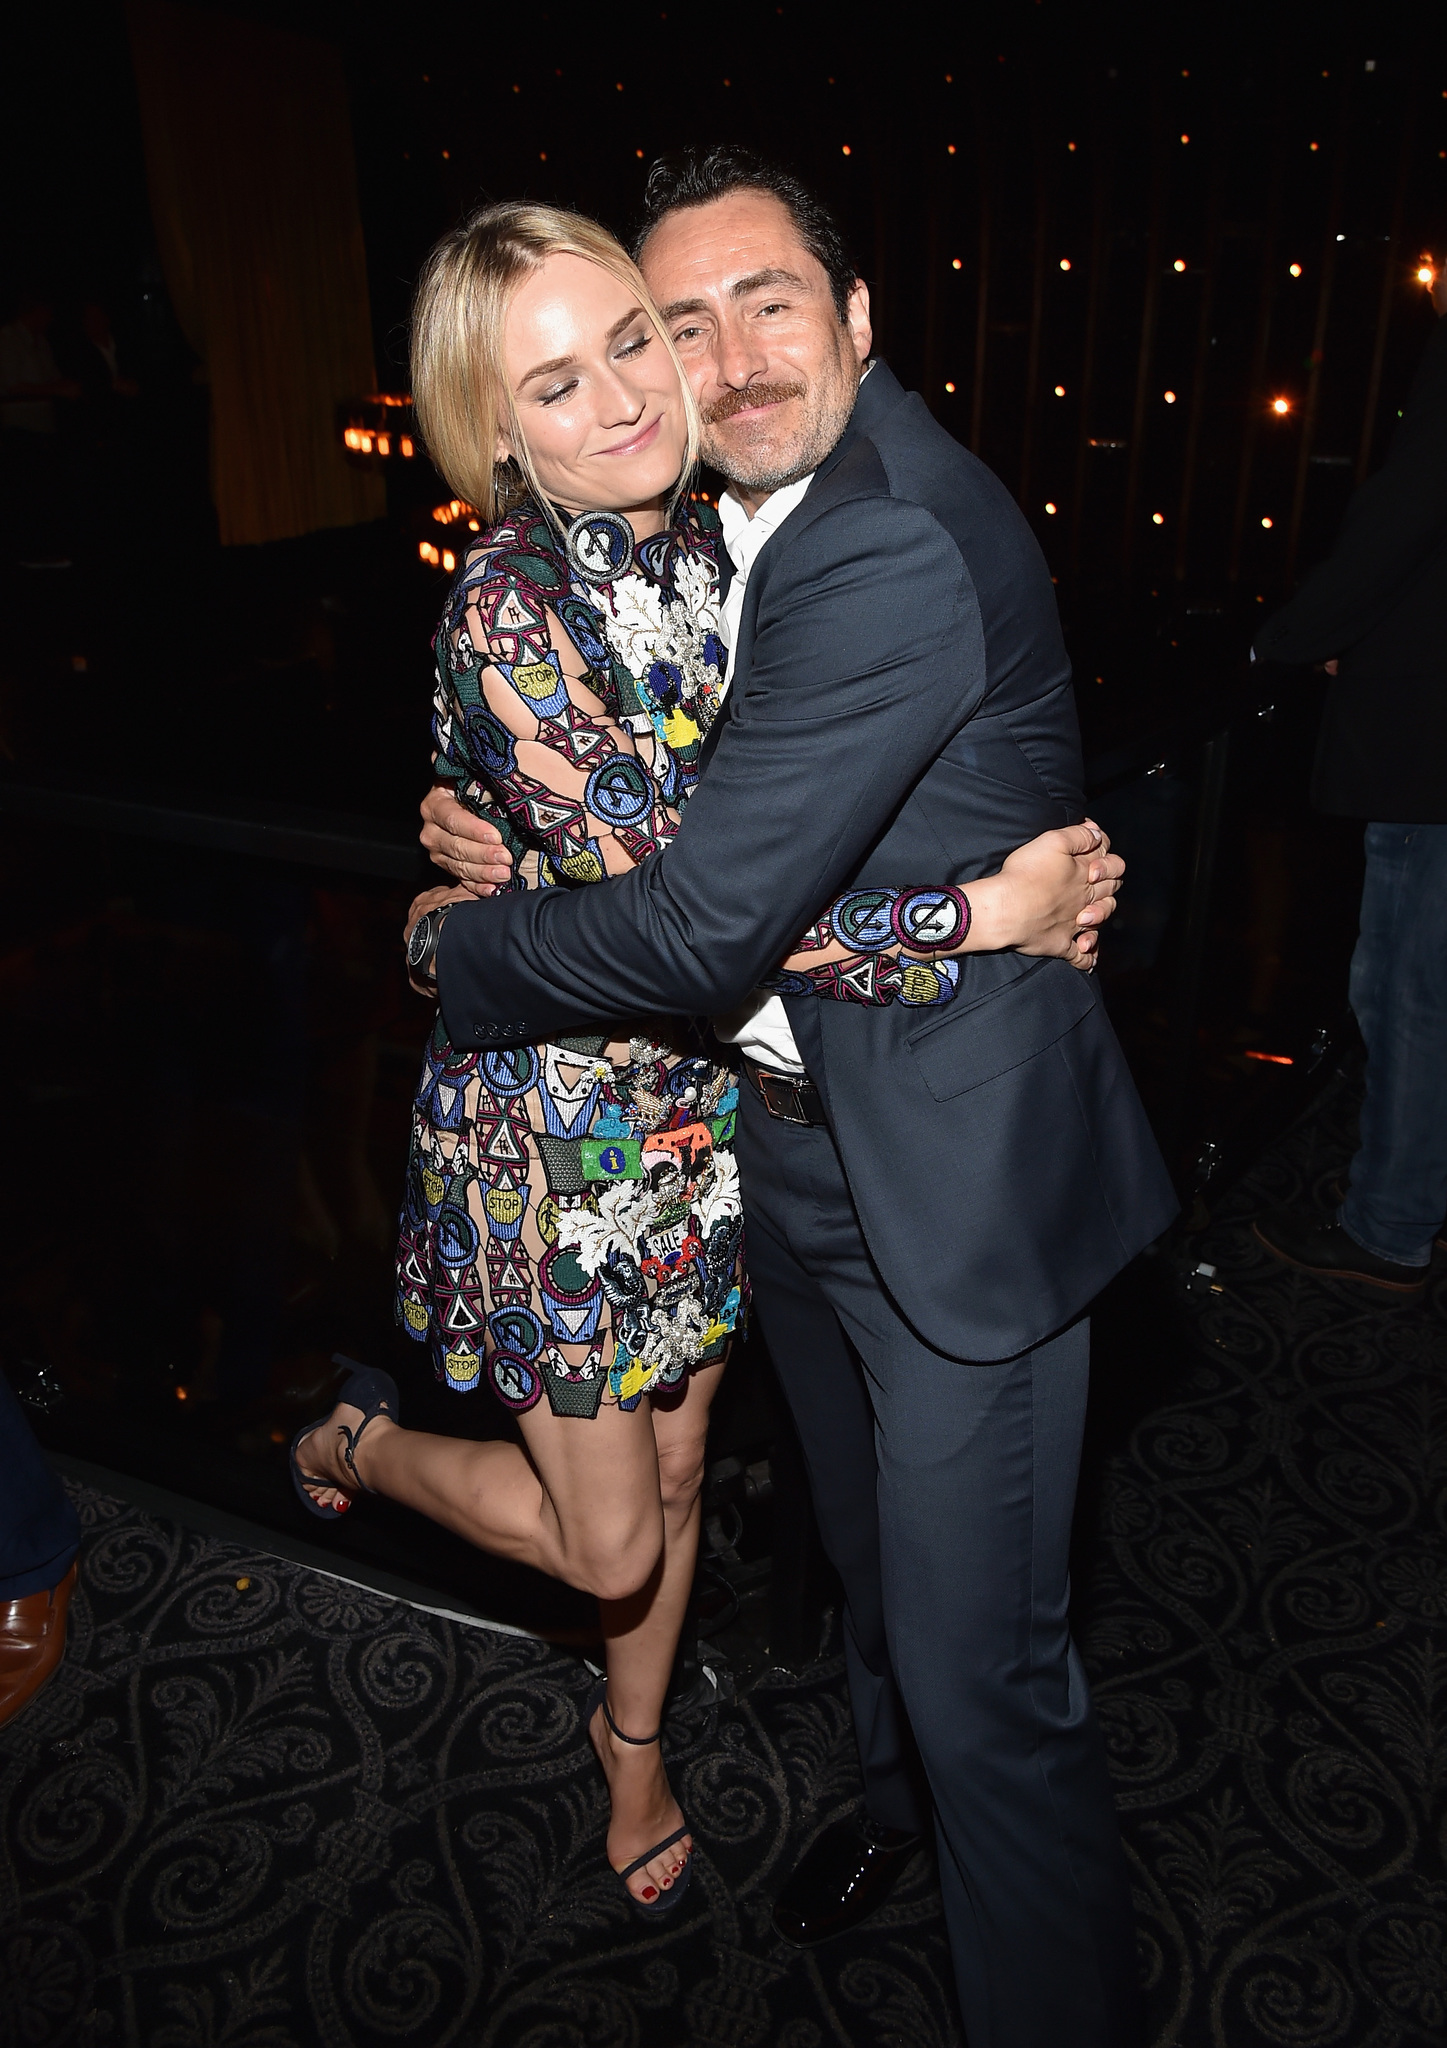 Actors Diane Kruger and Demian Bichir attend the after party for the season premiere of FX's 